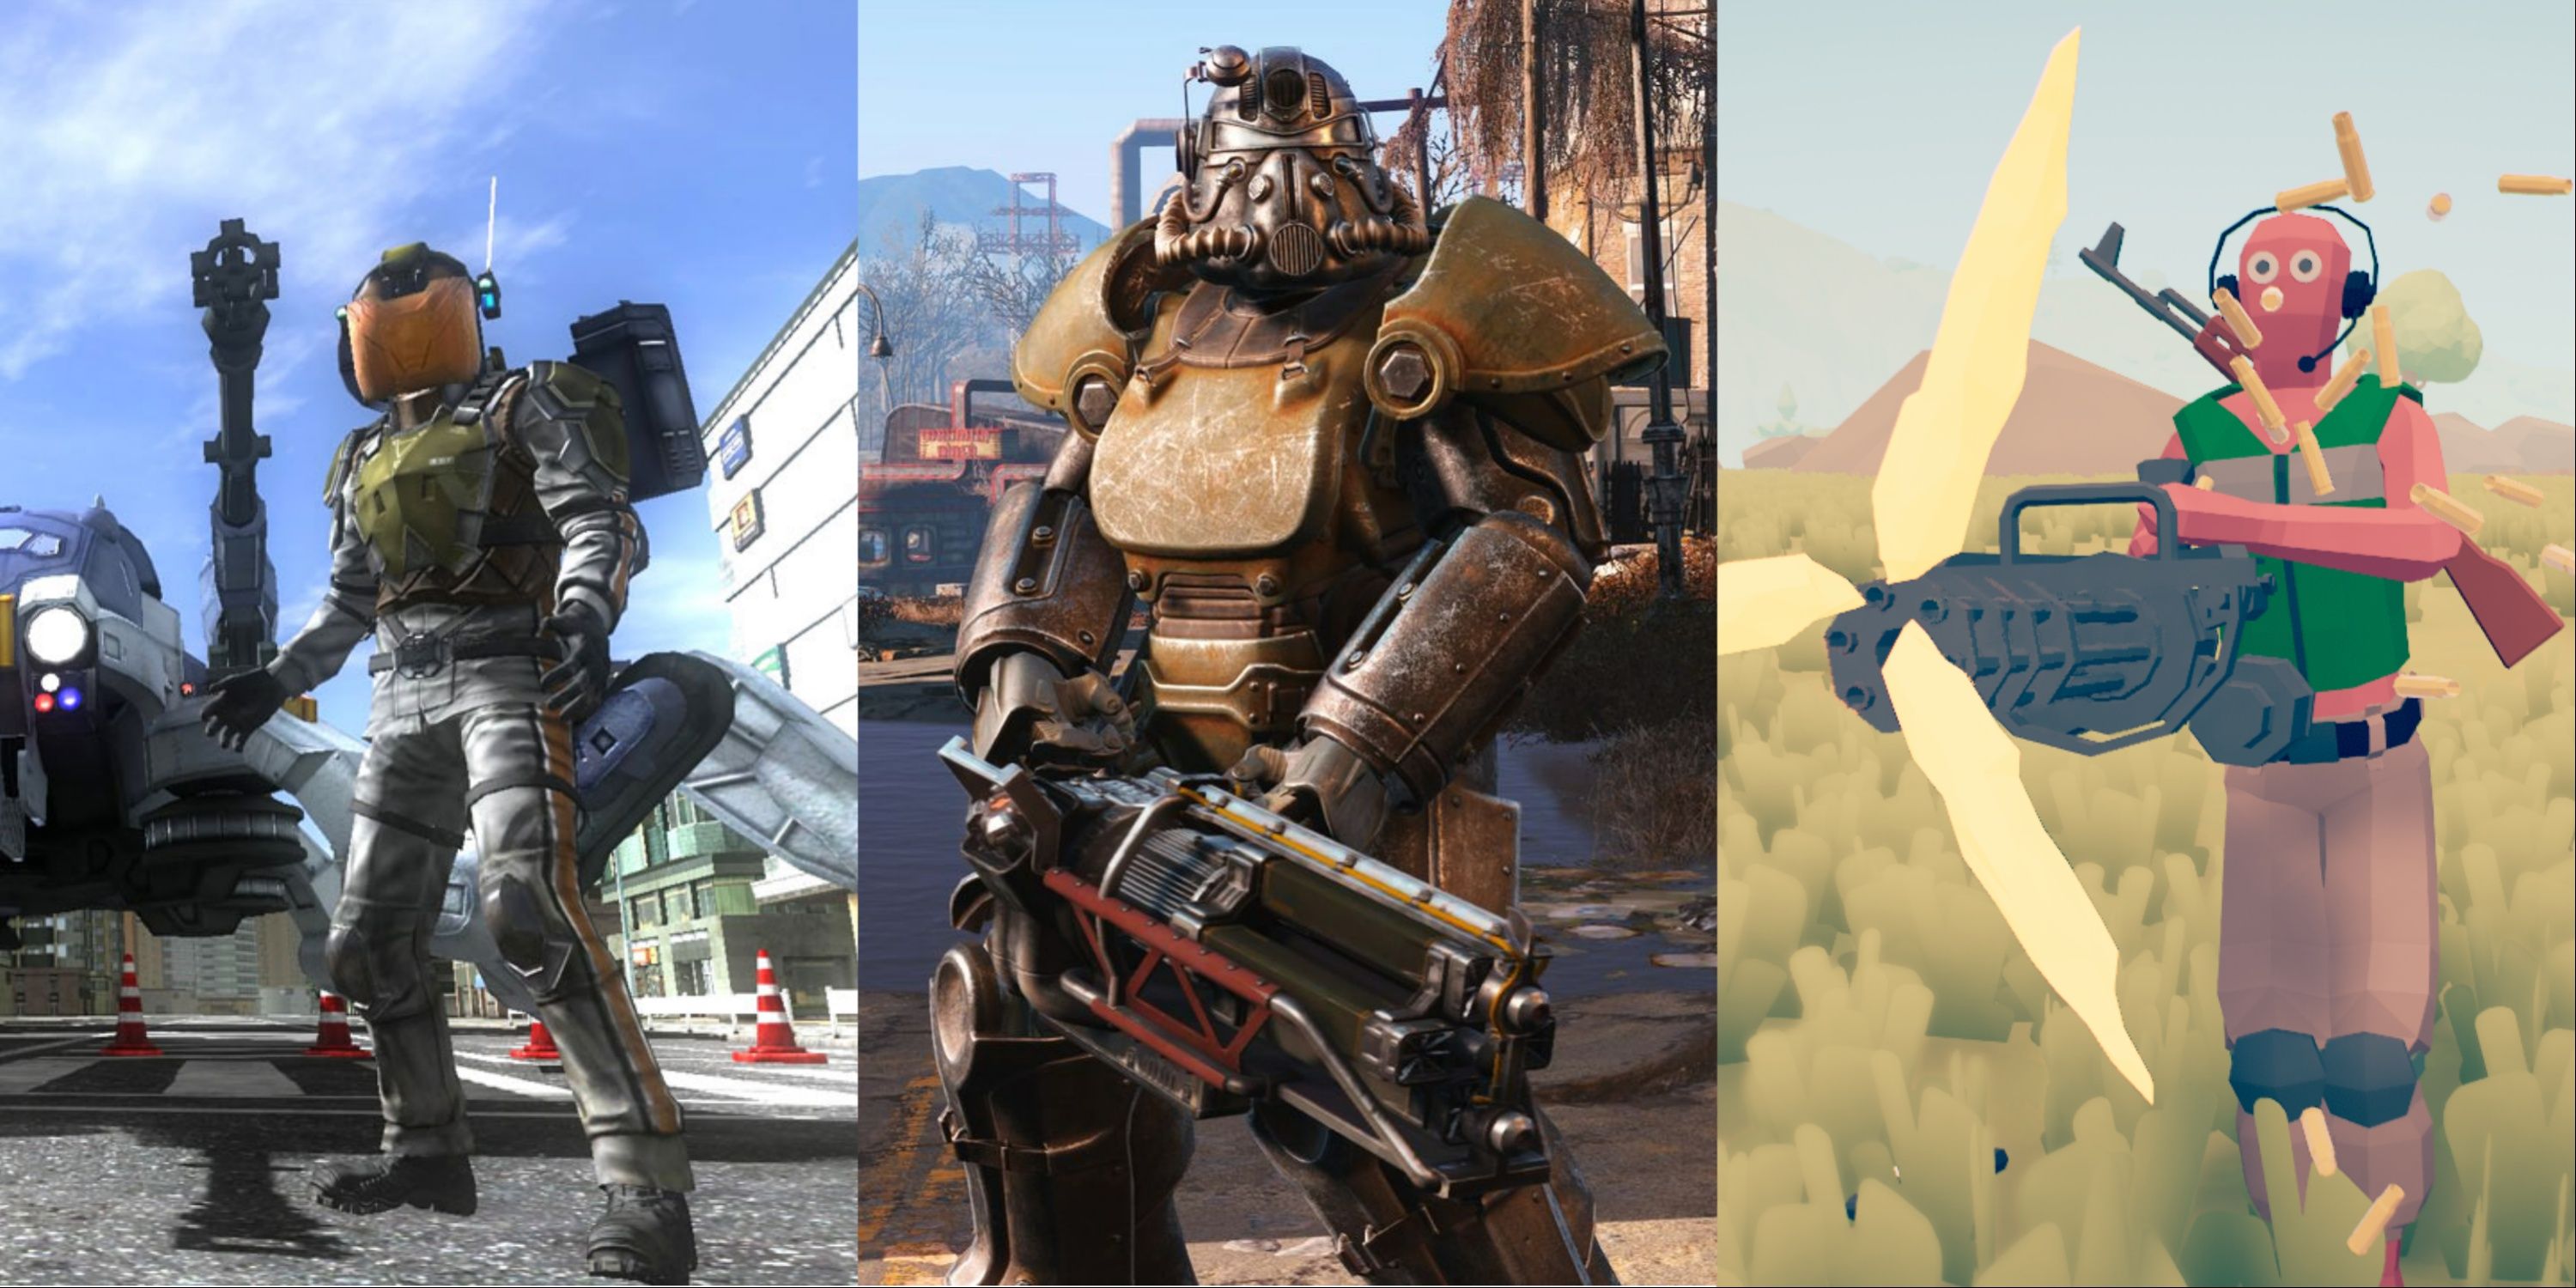 Earth Defense Force 4.1, Fallout 4, and Totally Accurate Battlgrounds Collage